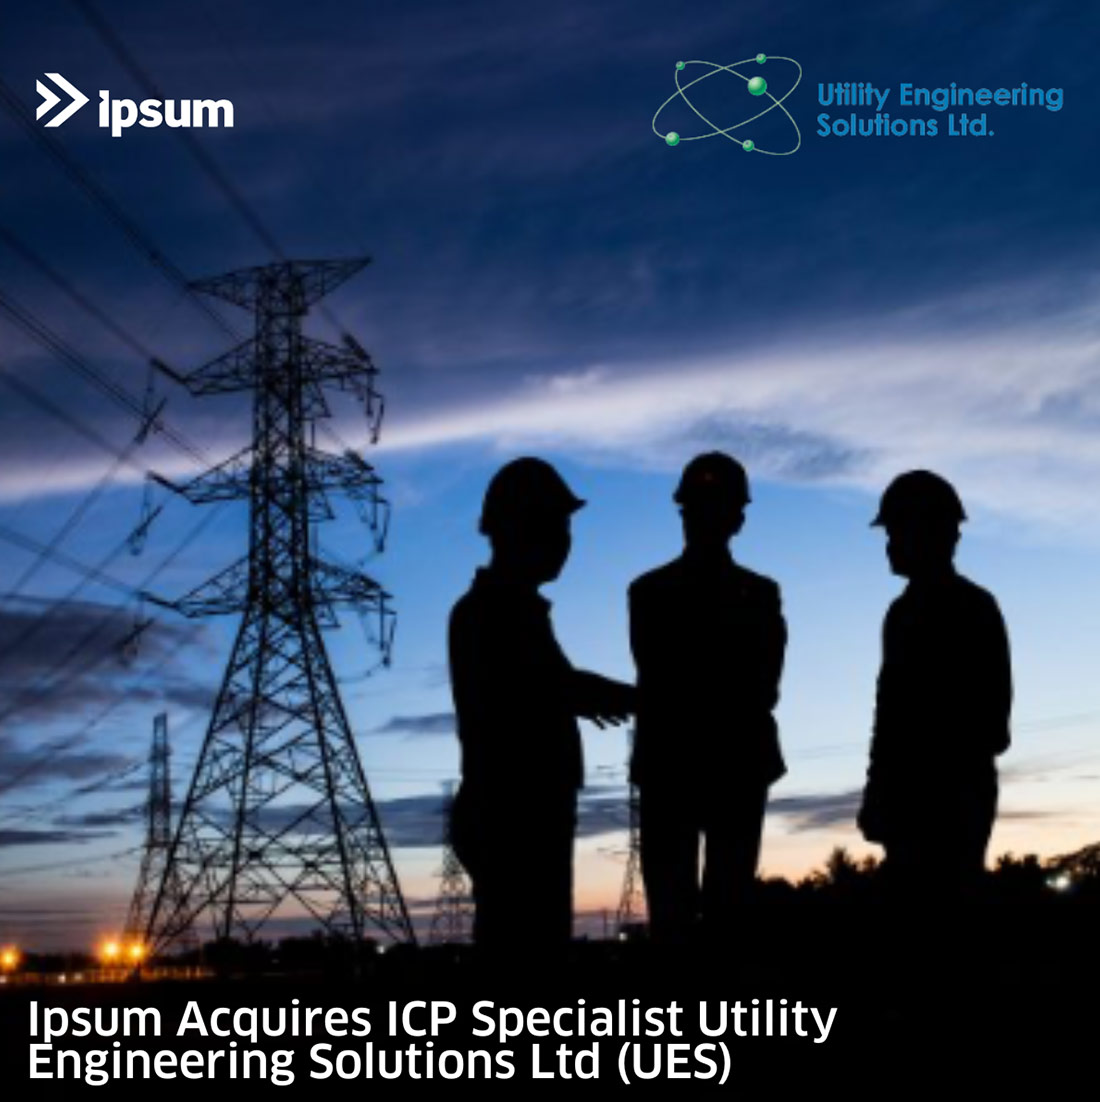 ICP Specialist Utility Engineering Solutions